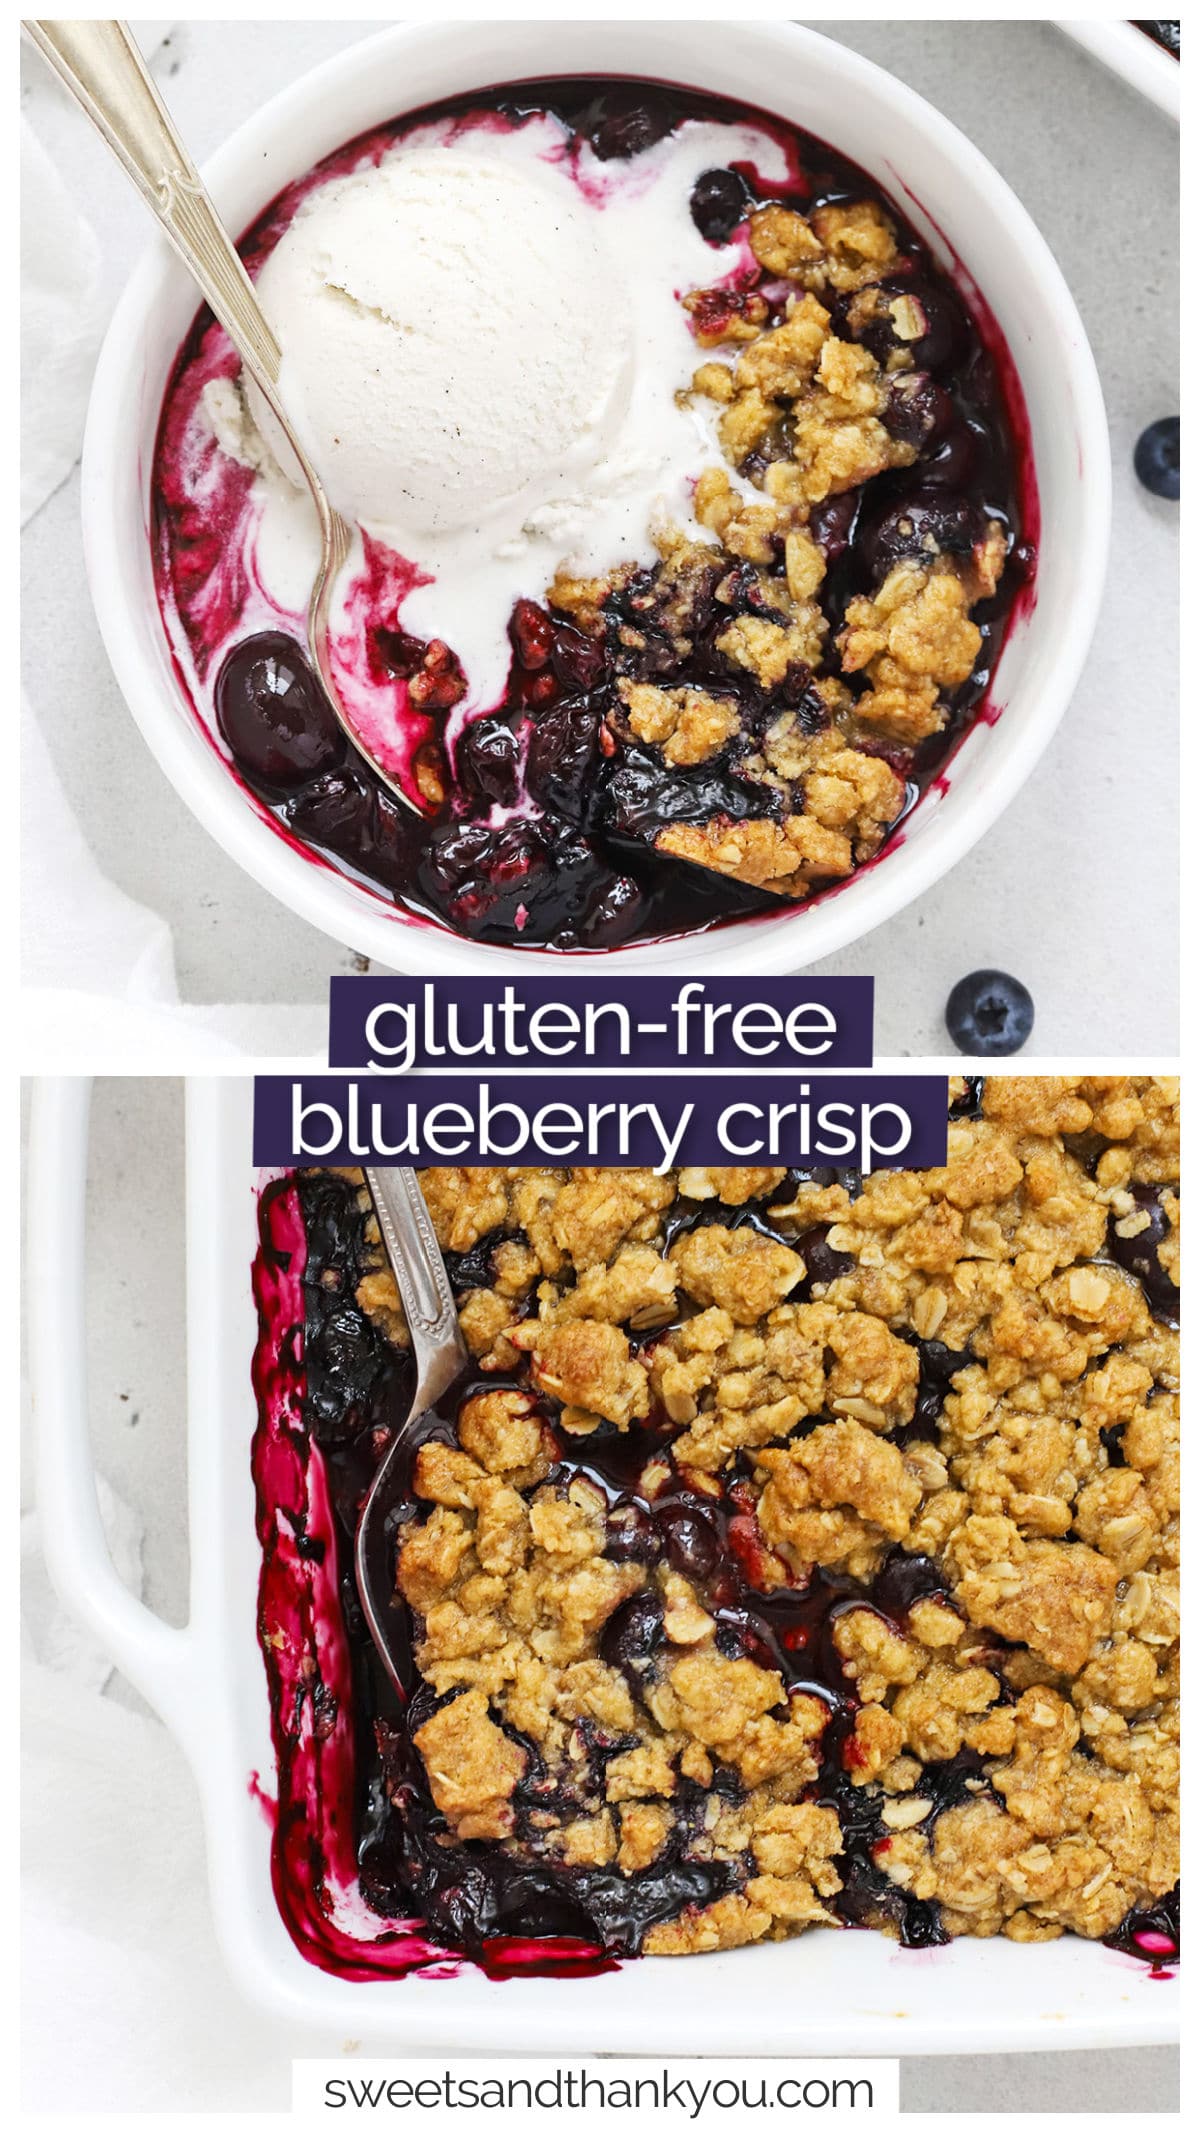 Let's make Gluten-Free Blueberry Crisp! This easy blueberry crumble recipe is bursting with fresh blueberry flavor! (You'll love the crispy oat  crumble topping.) It's an easy gluten-free spring or summer dessert!